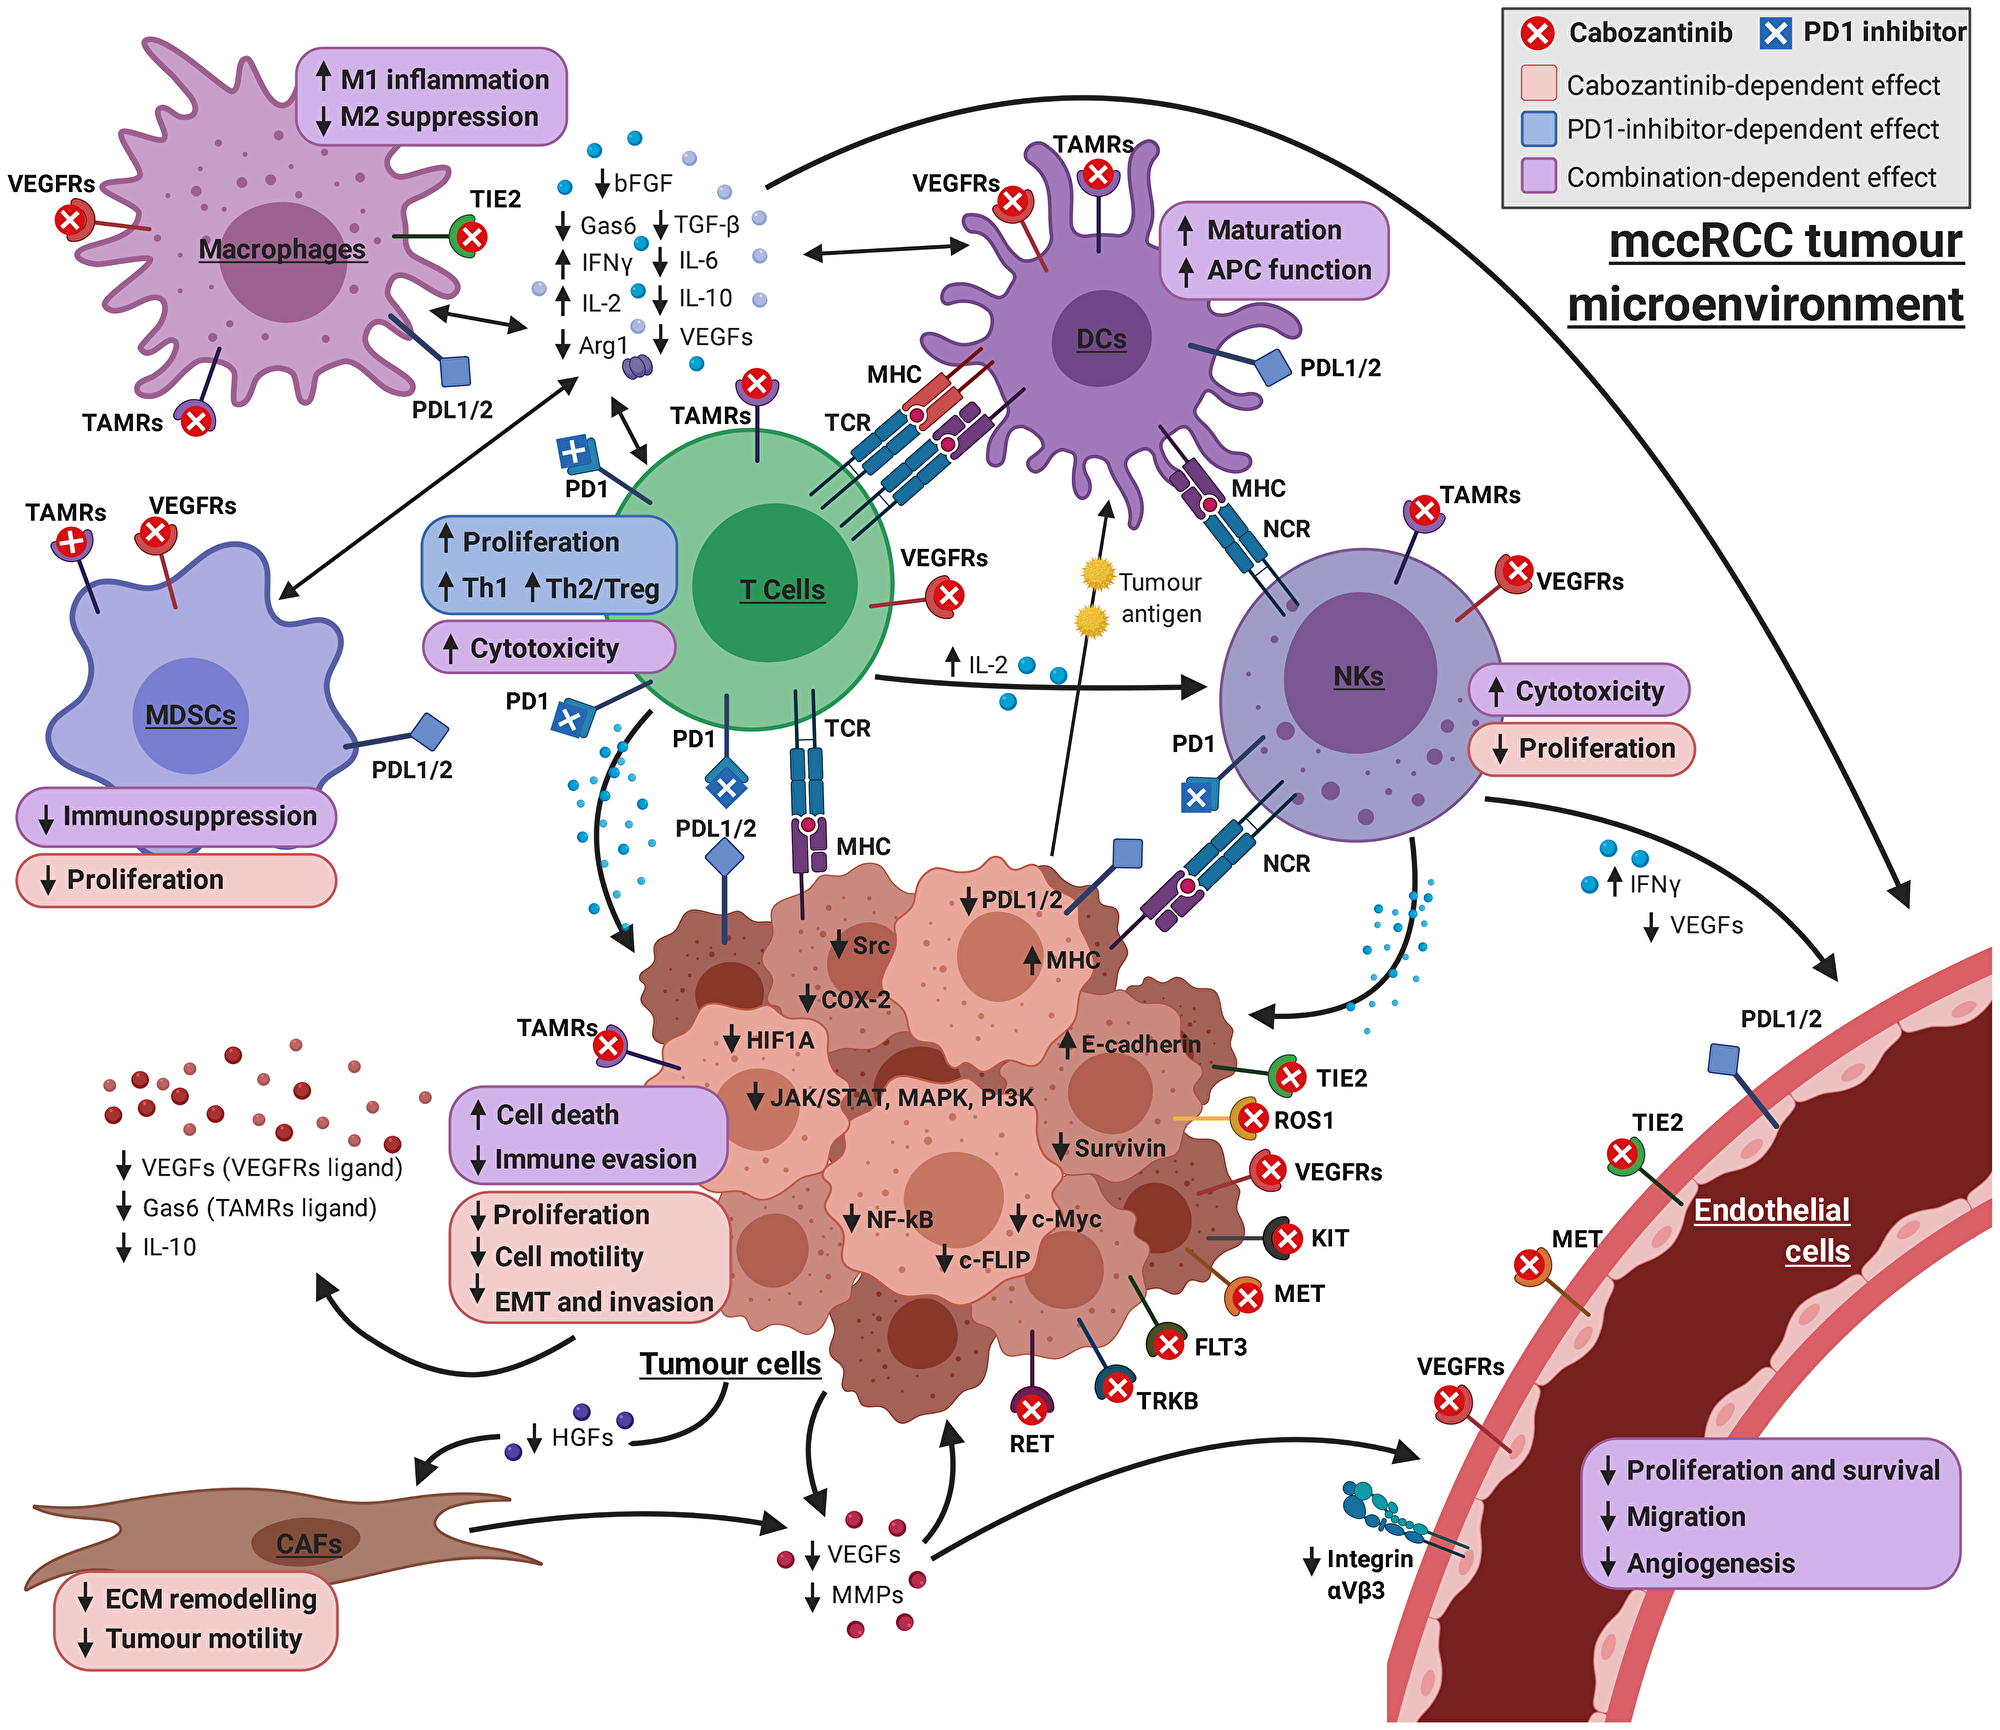 Graphical overview of the mechanism of cabozantinib + PD1 inhibitor on the complex interplay between the cell types involved in mRCC pathogenesis.